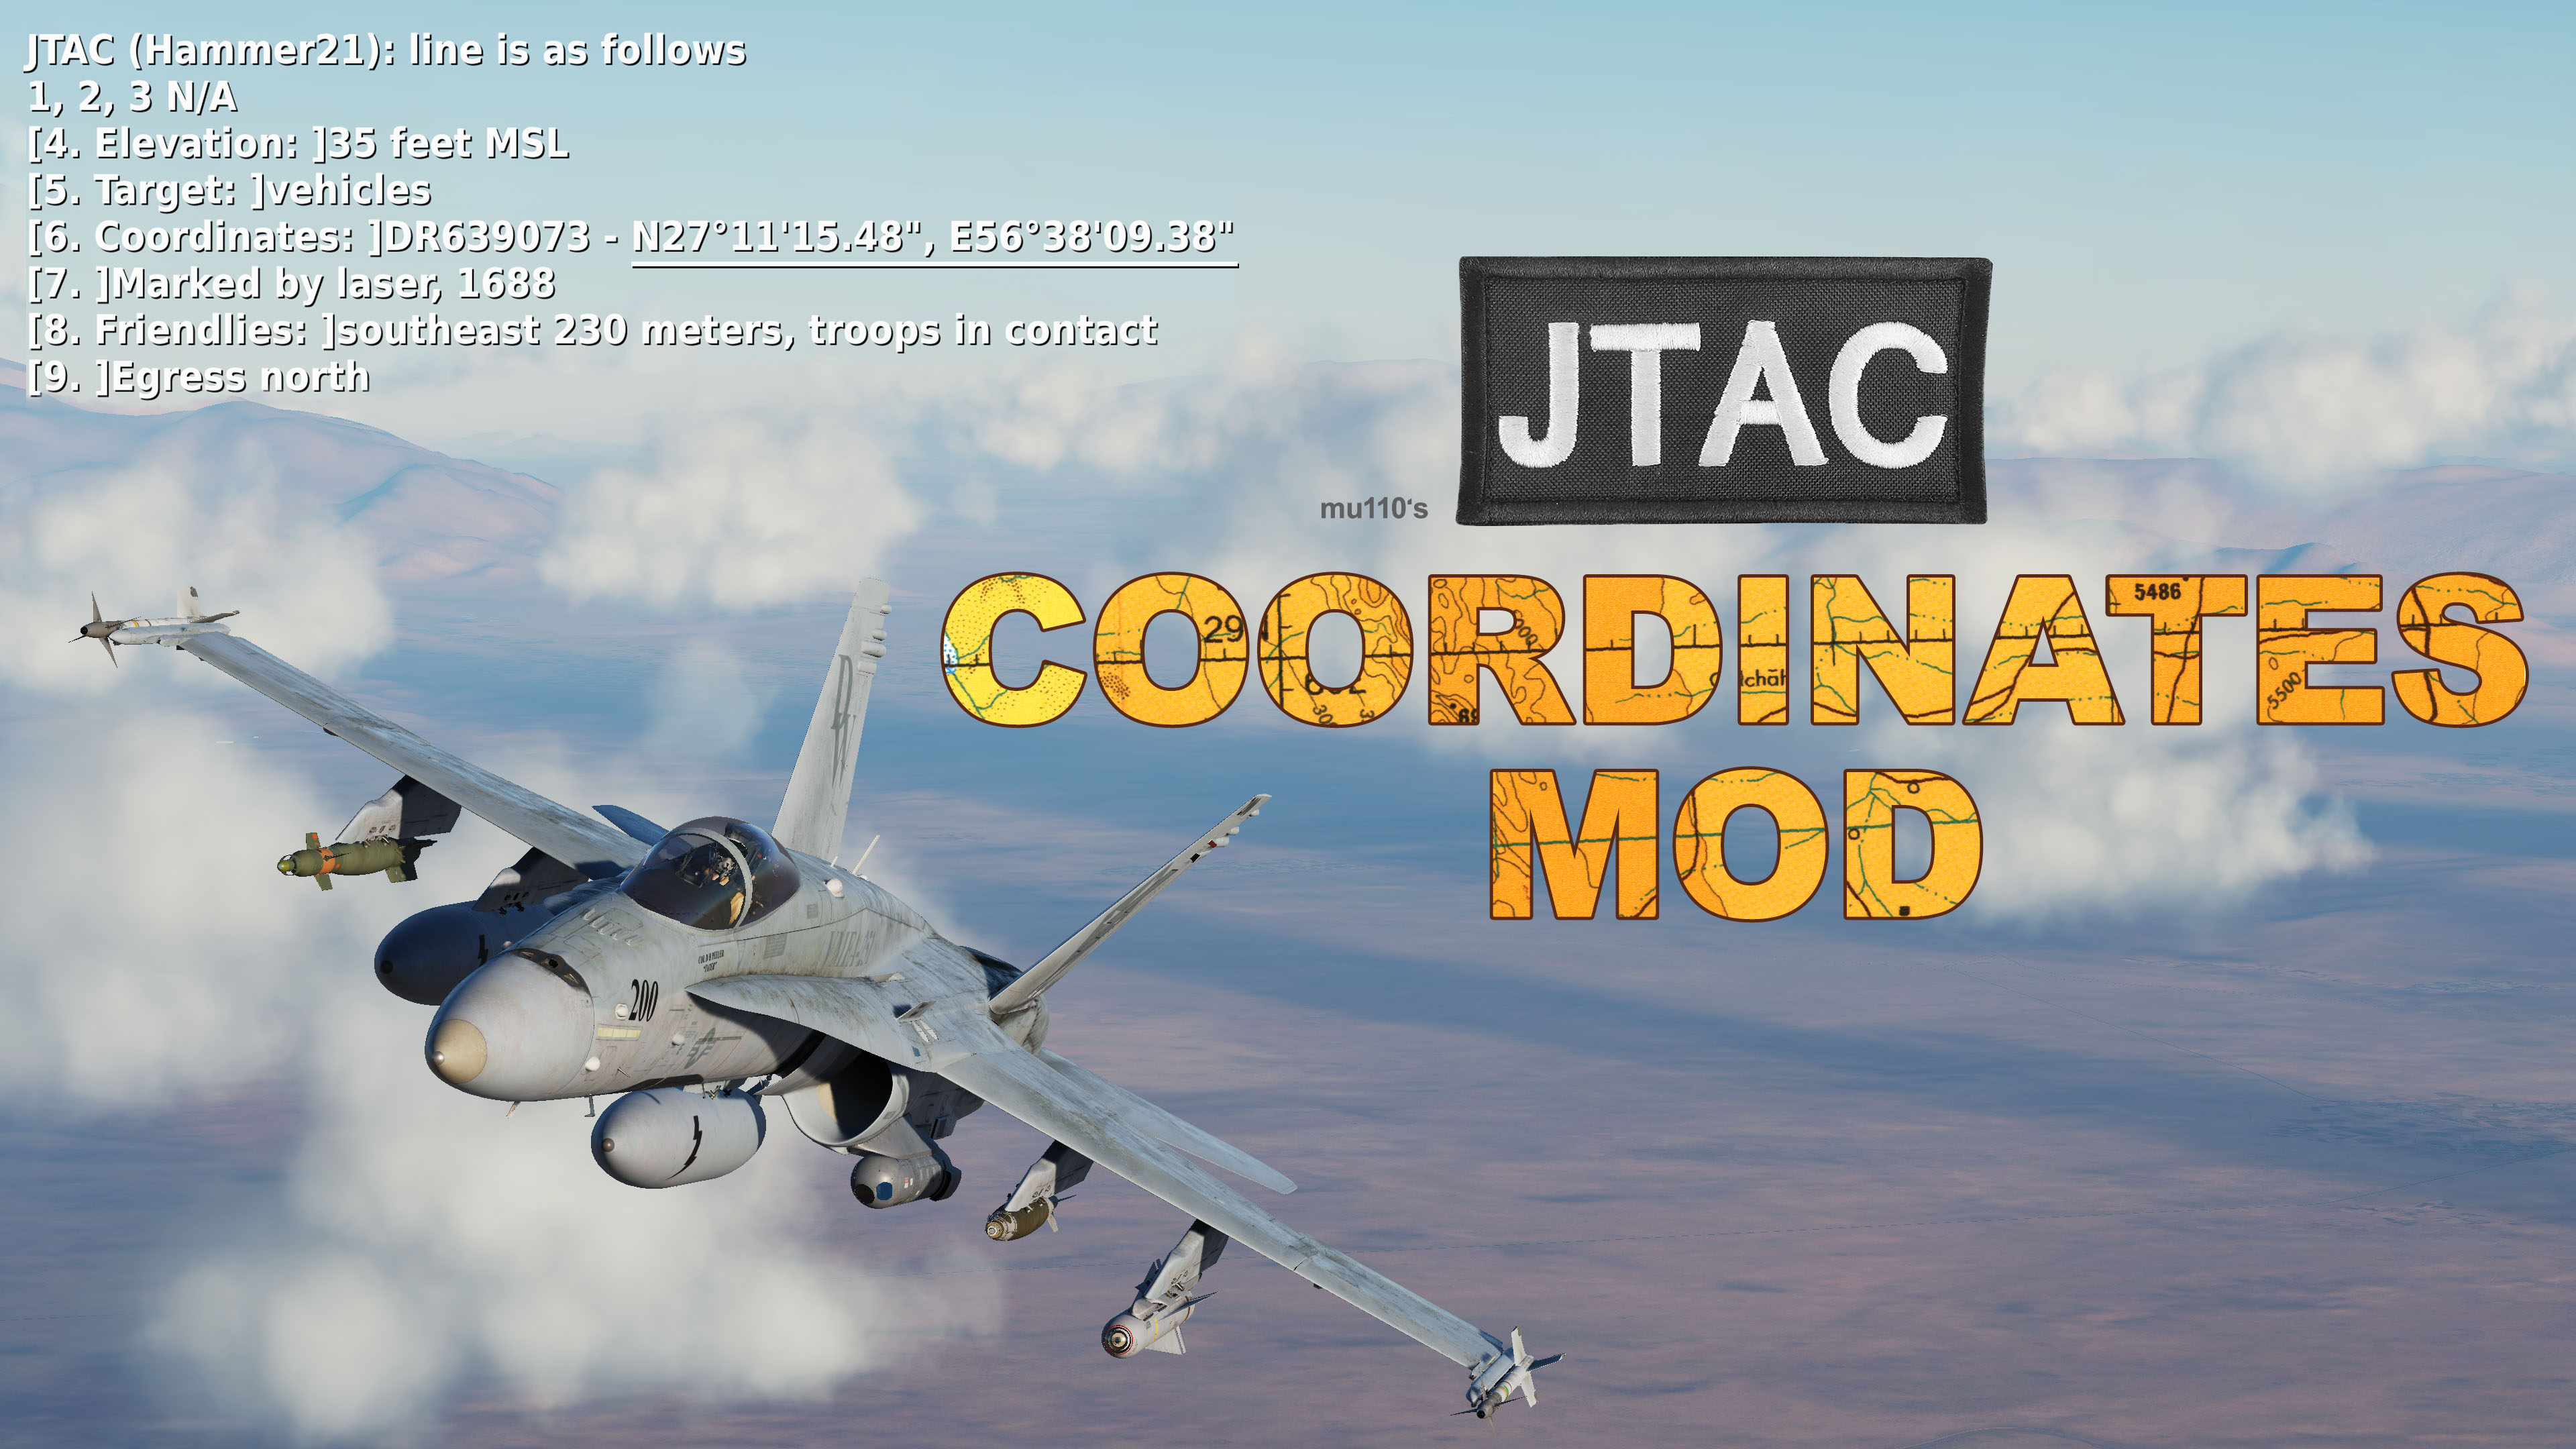 JTAC Coordinates in Lat/Long [UPDATED for 2.7.0]